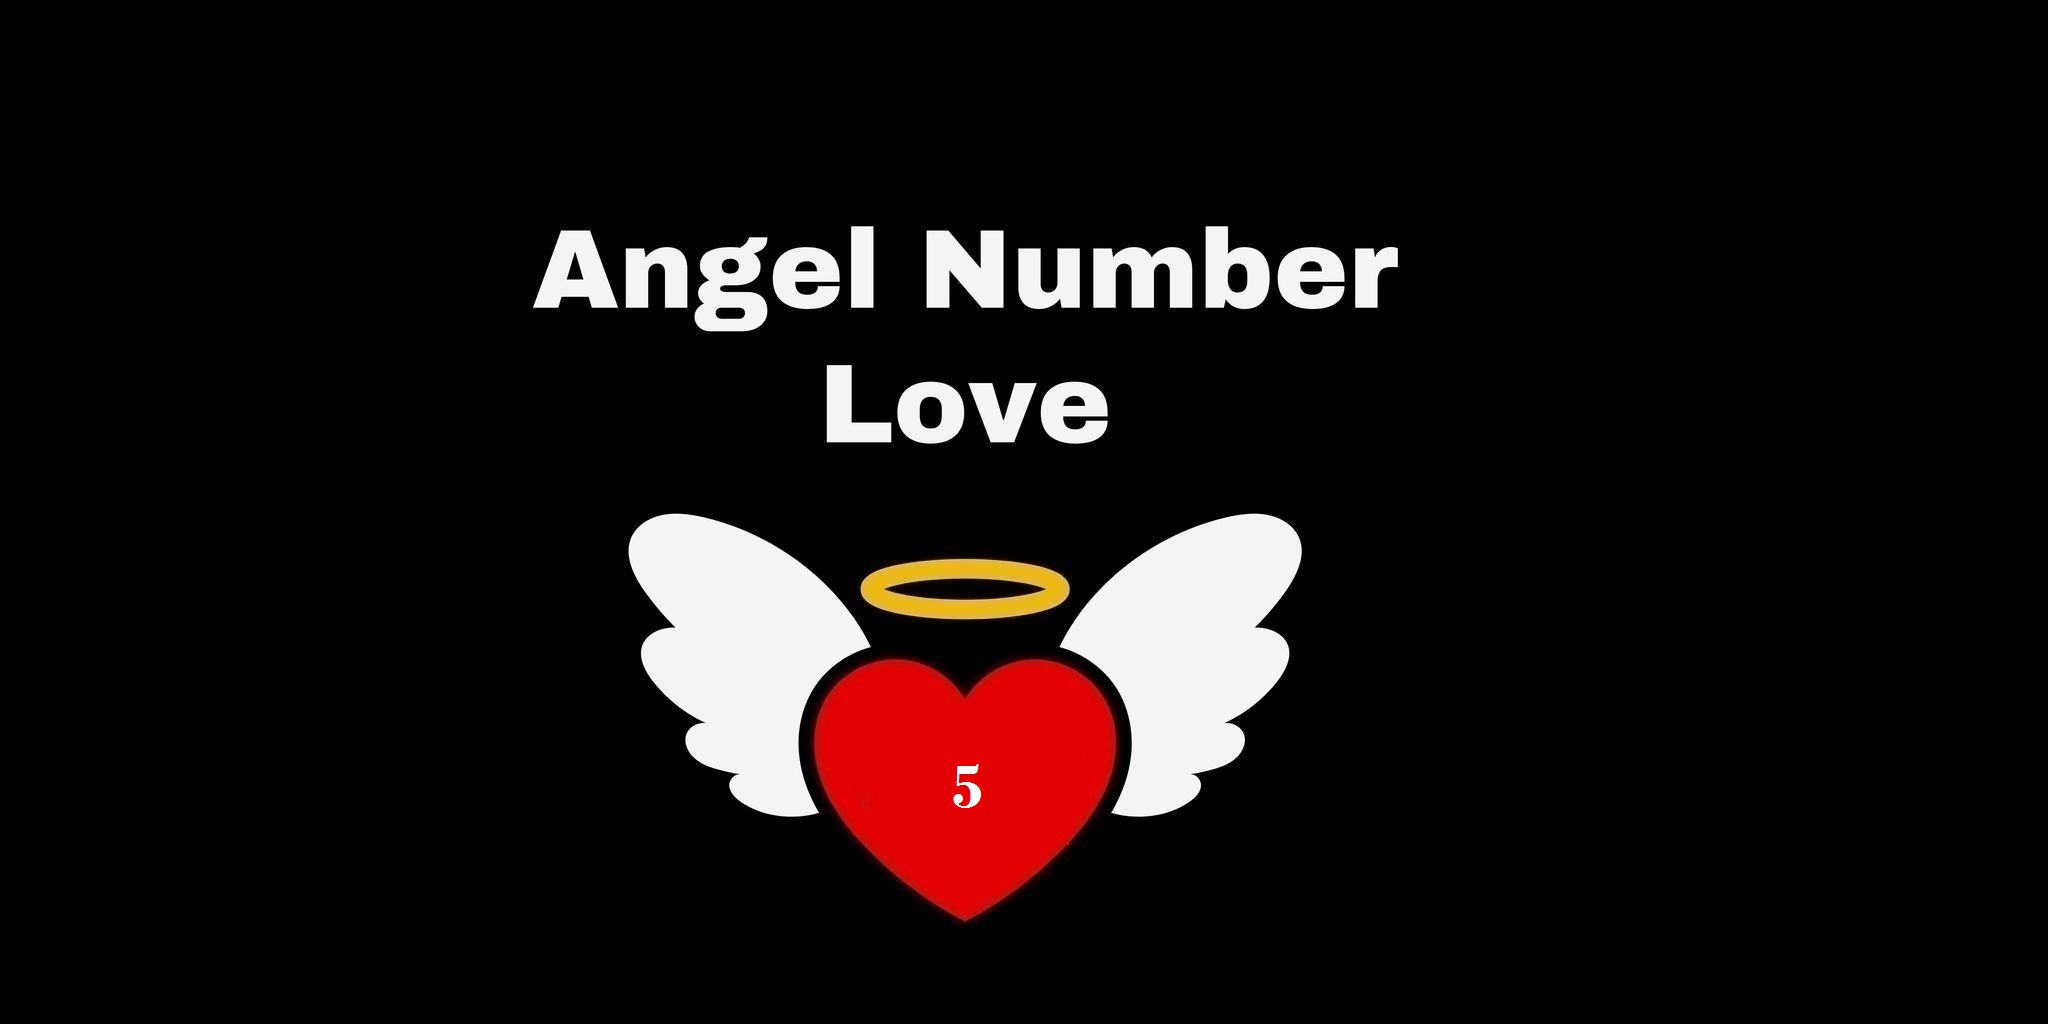 5 Angel Number Meaning In Love